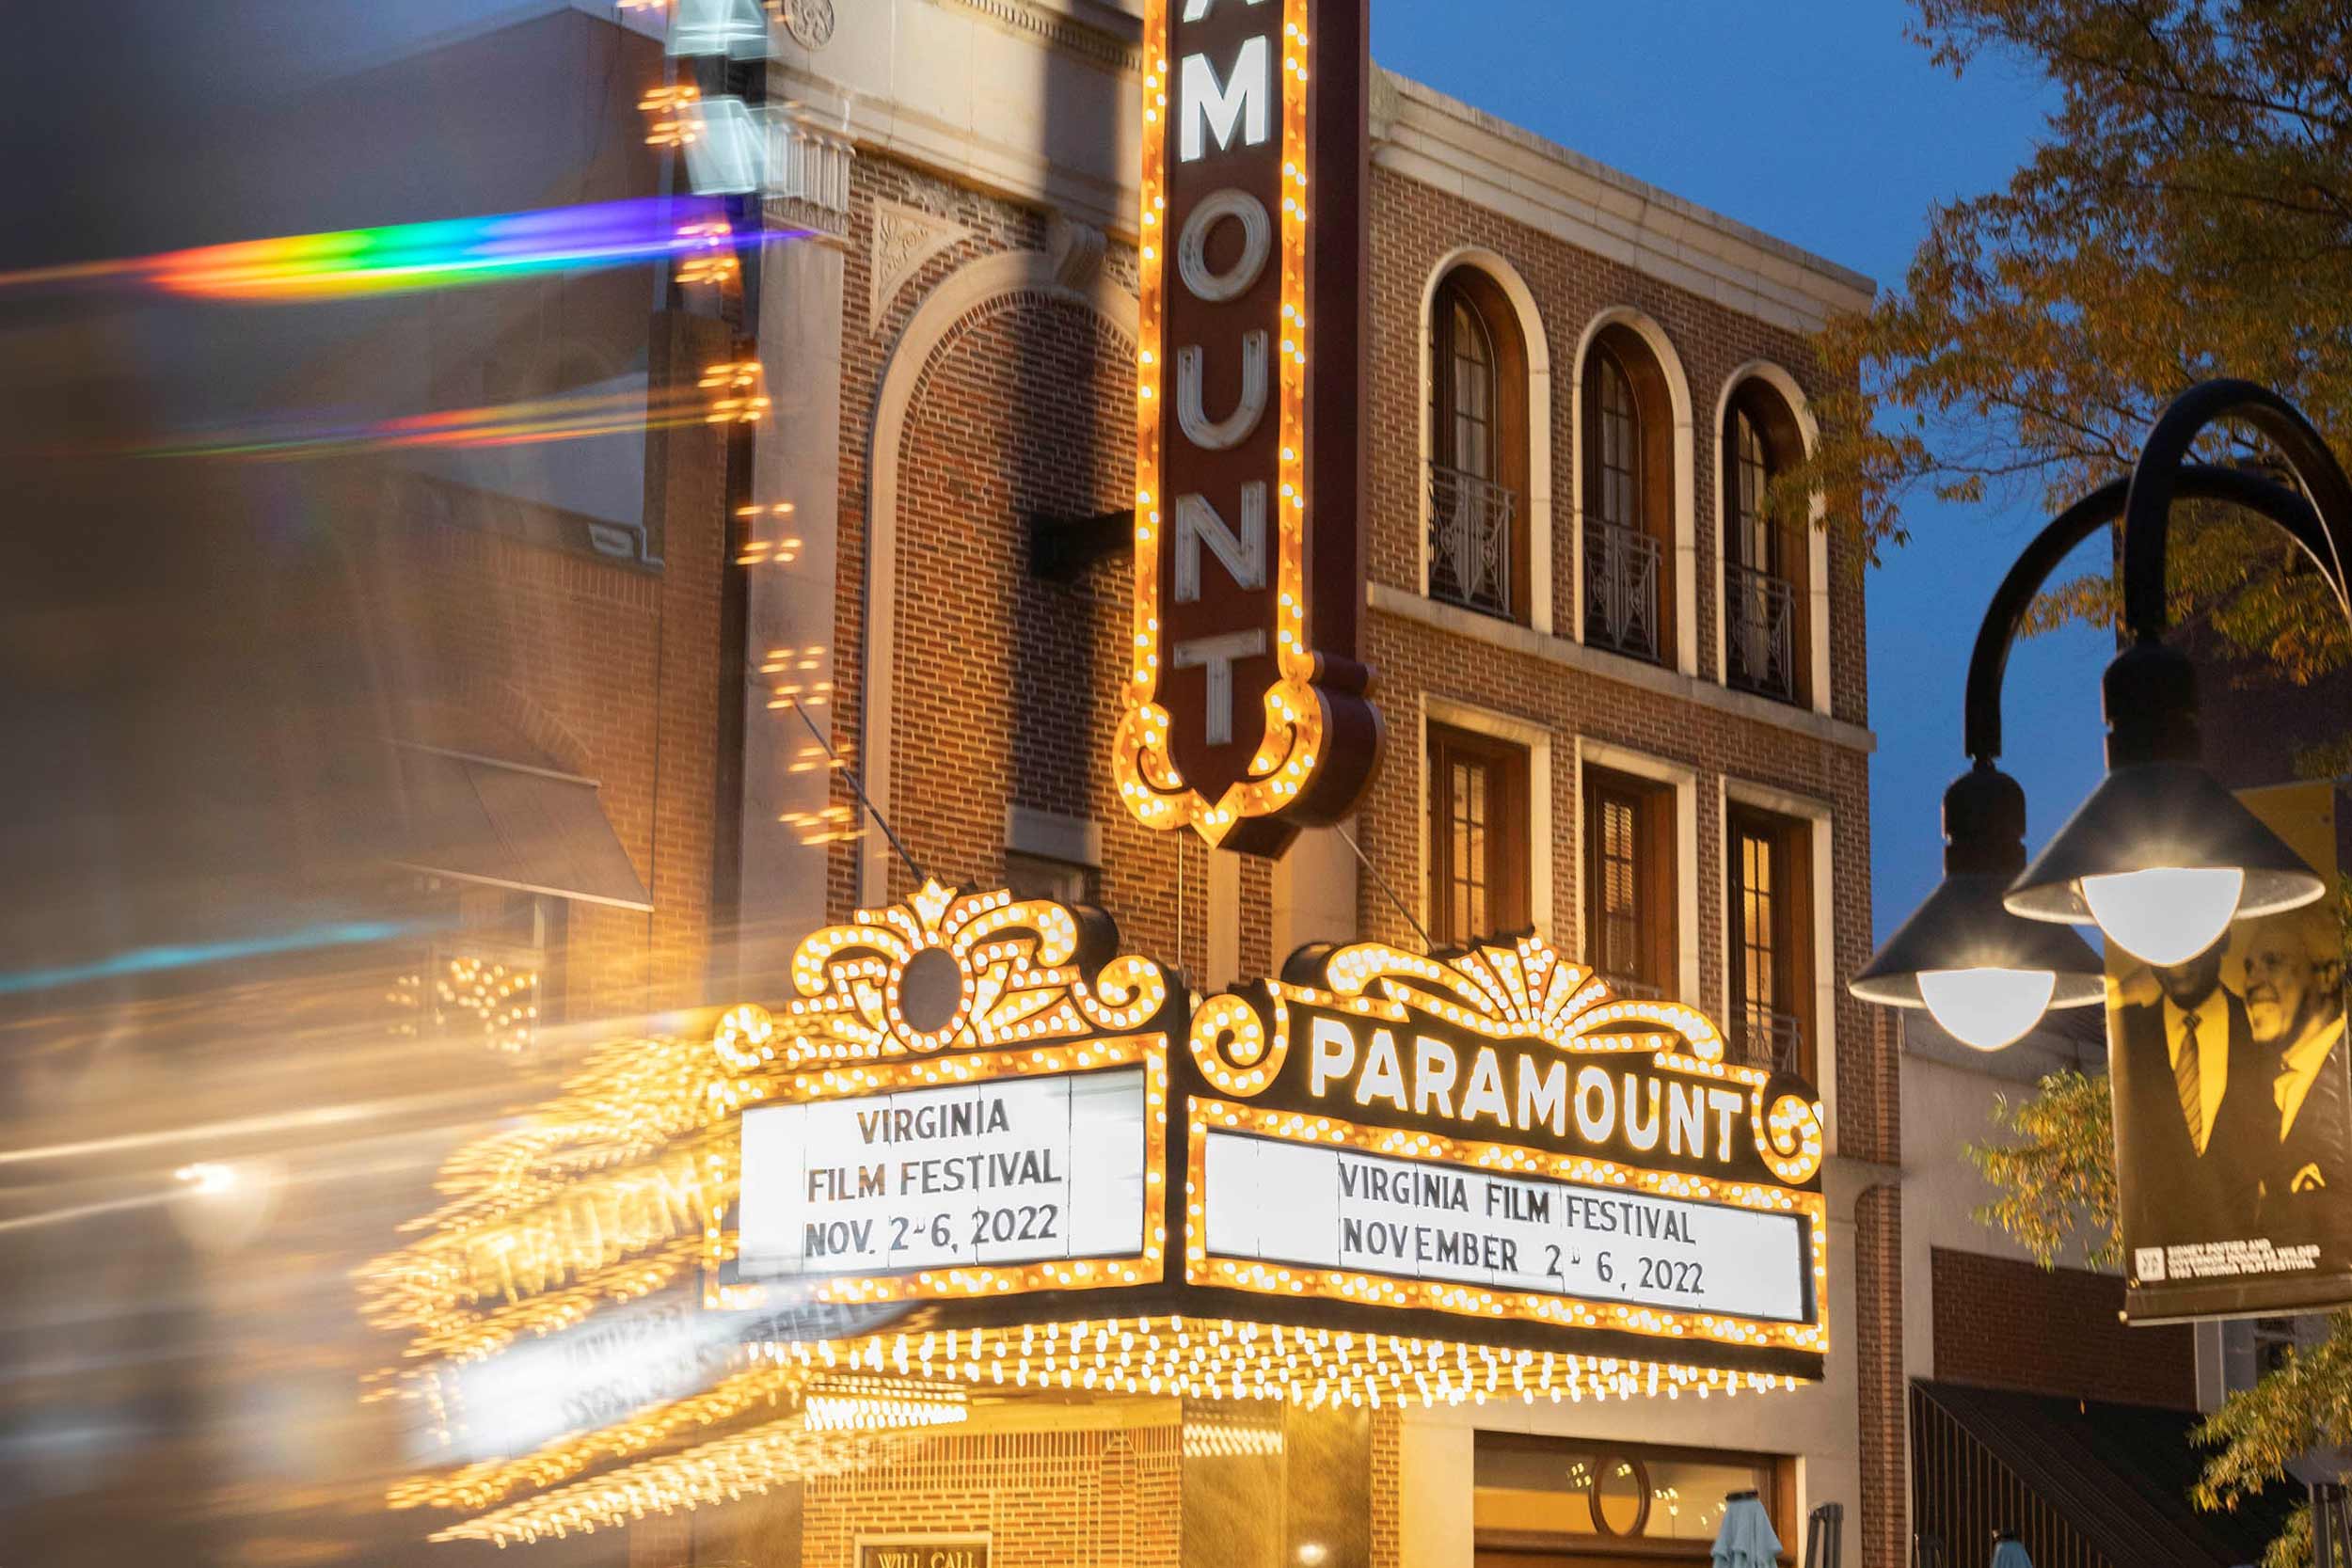 A photo of the marquee on the Paramount Theater from last year's Film Festival which reads, "Virginia Film Festival November 2-6, 2022" 